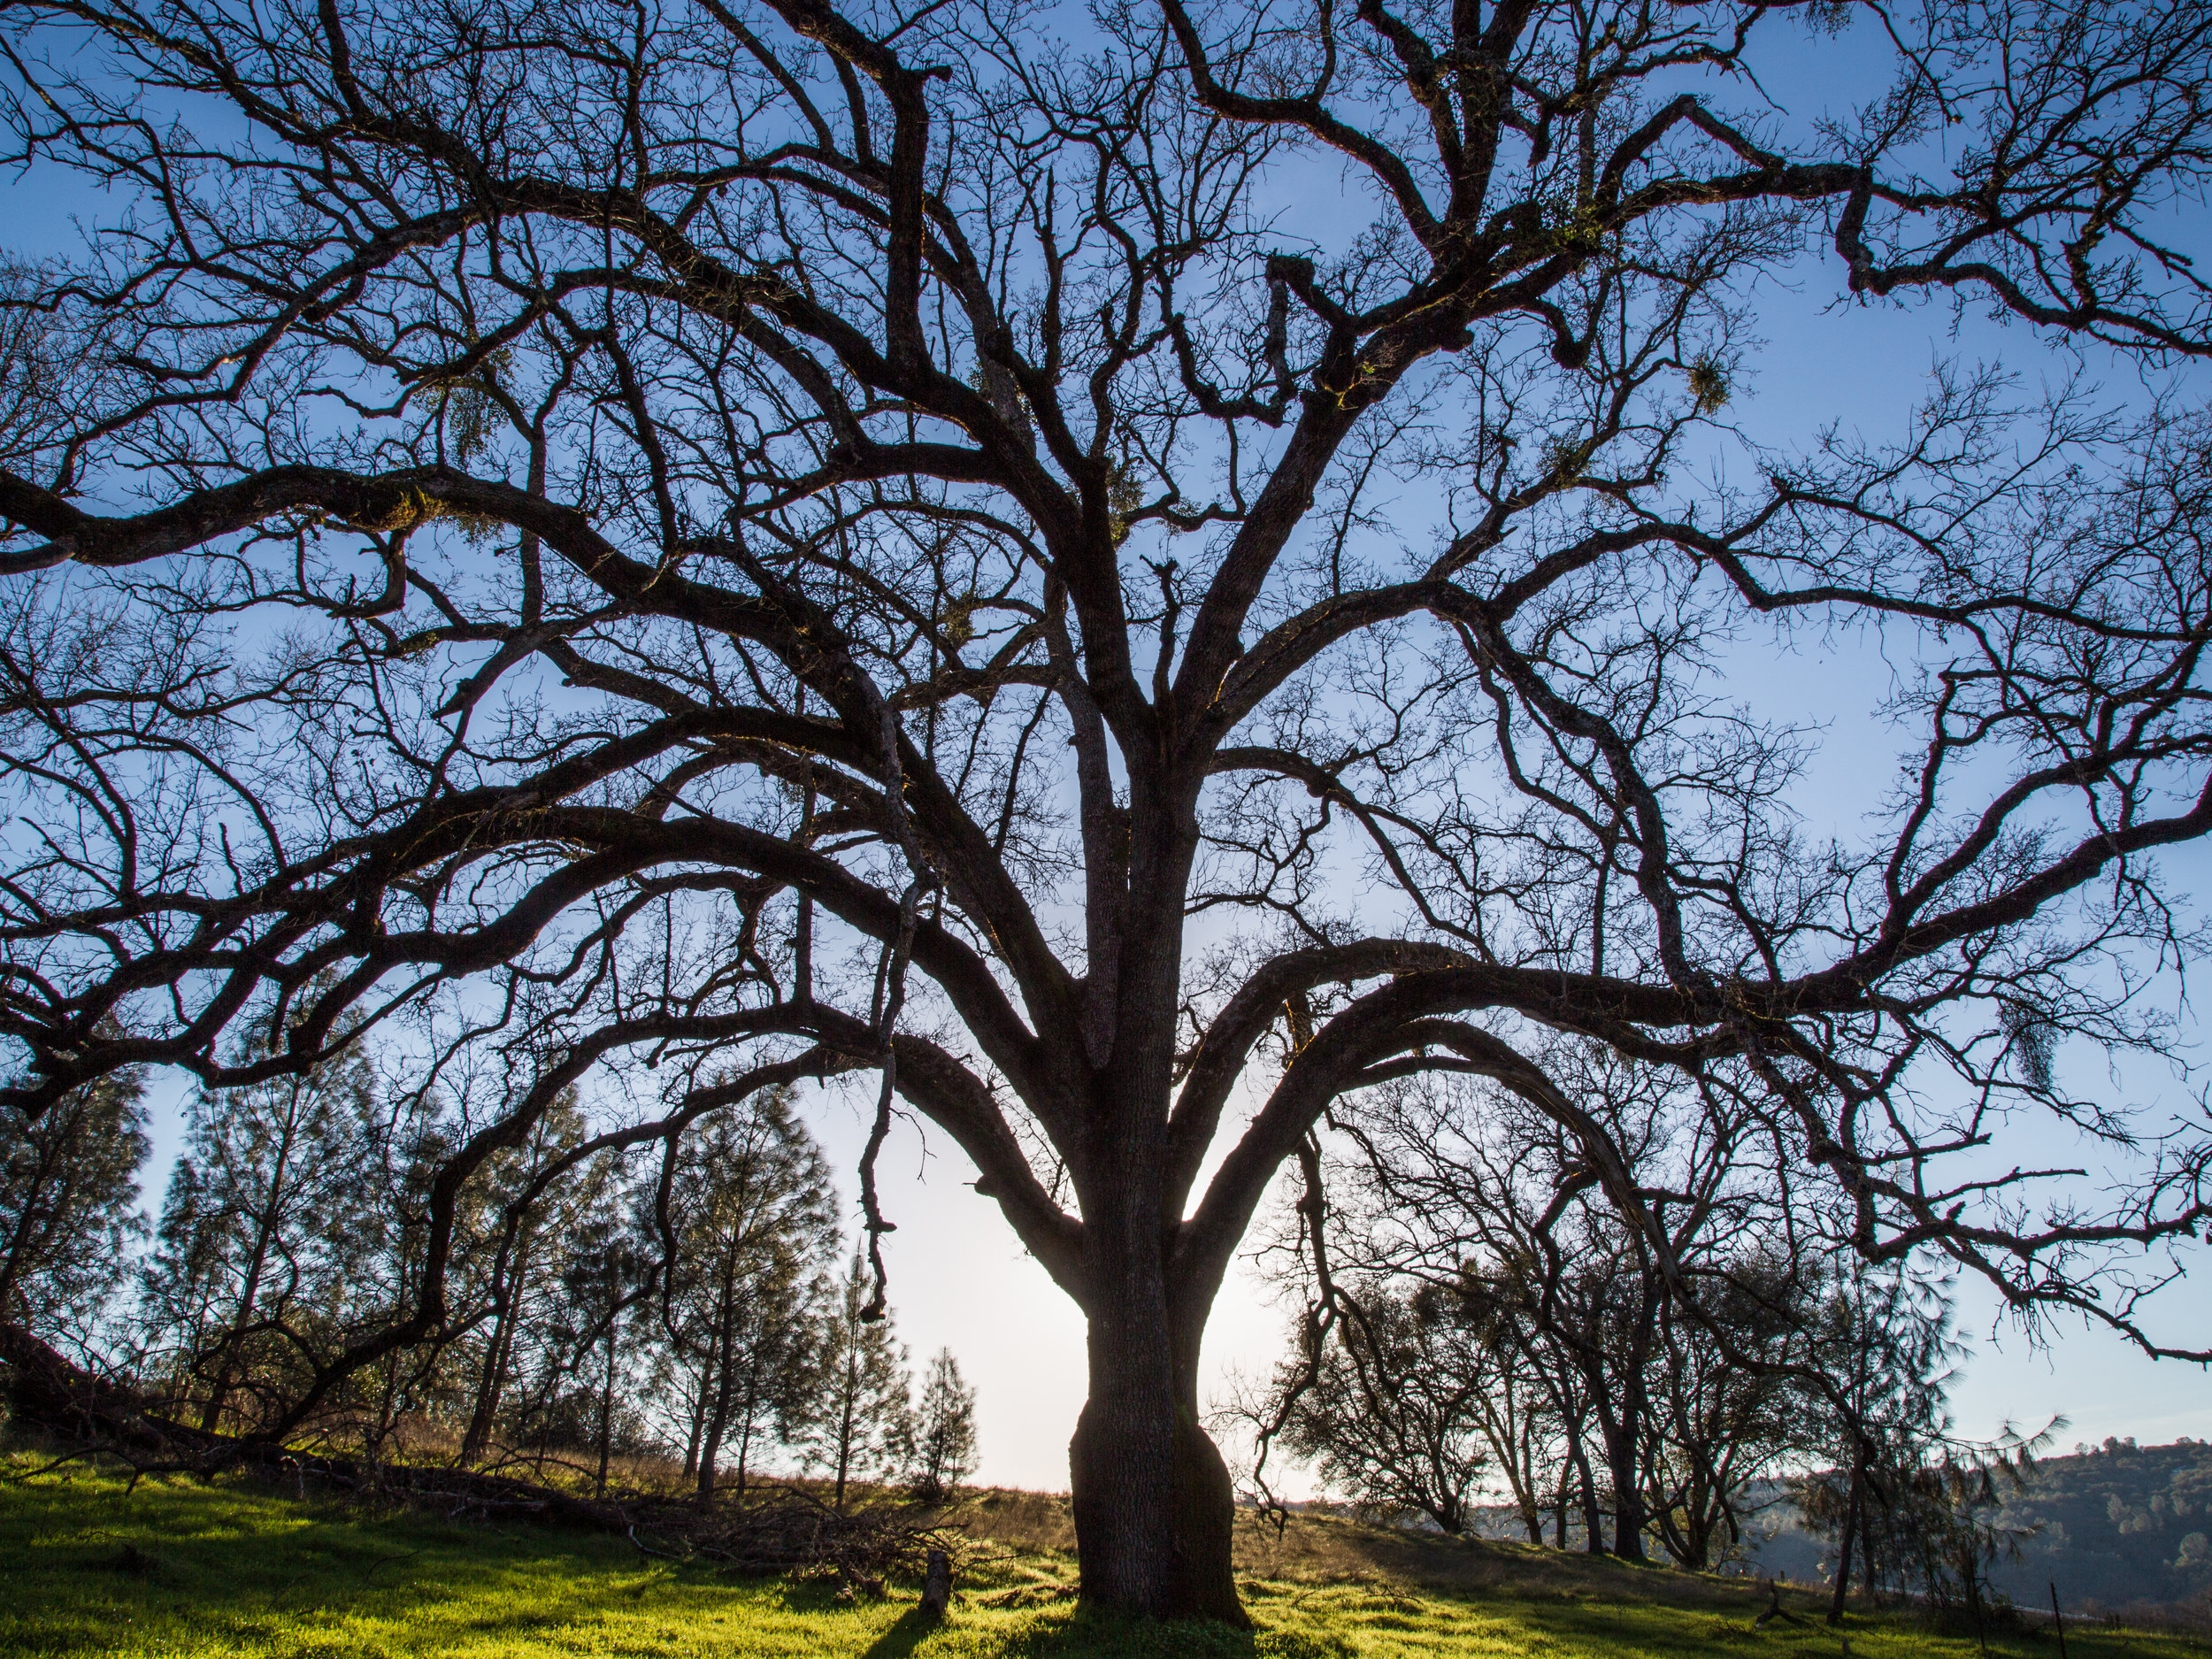 Solitary Oak Late Afternoon, Shingle Springs, CA